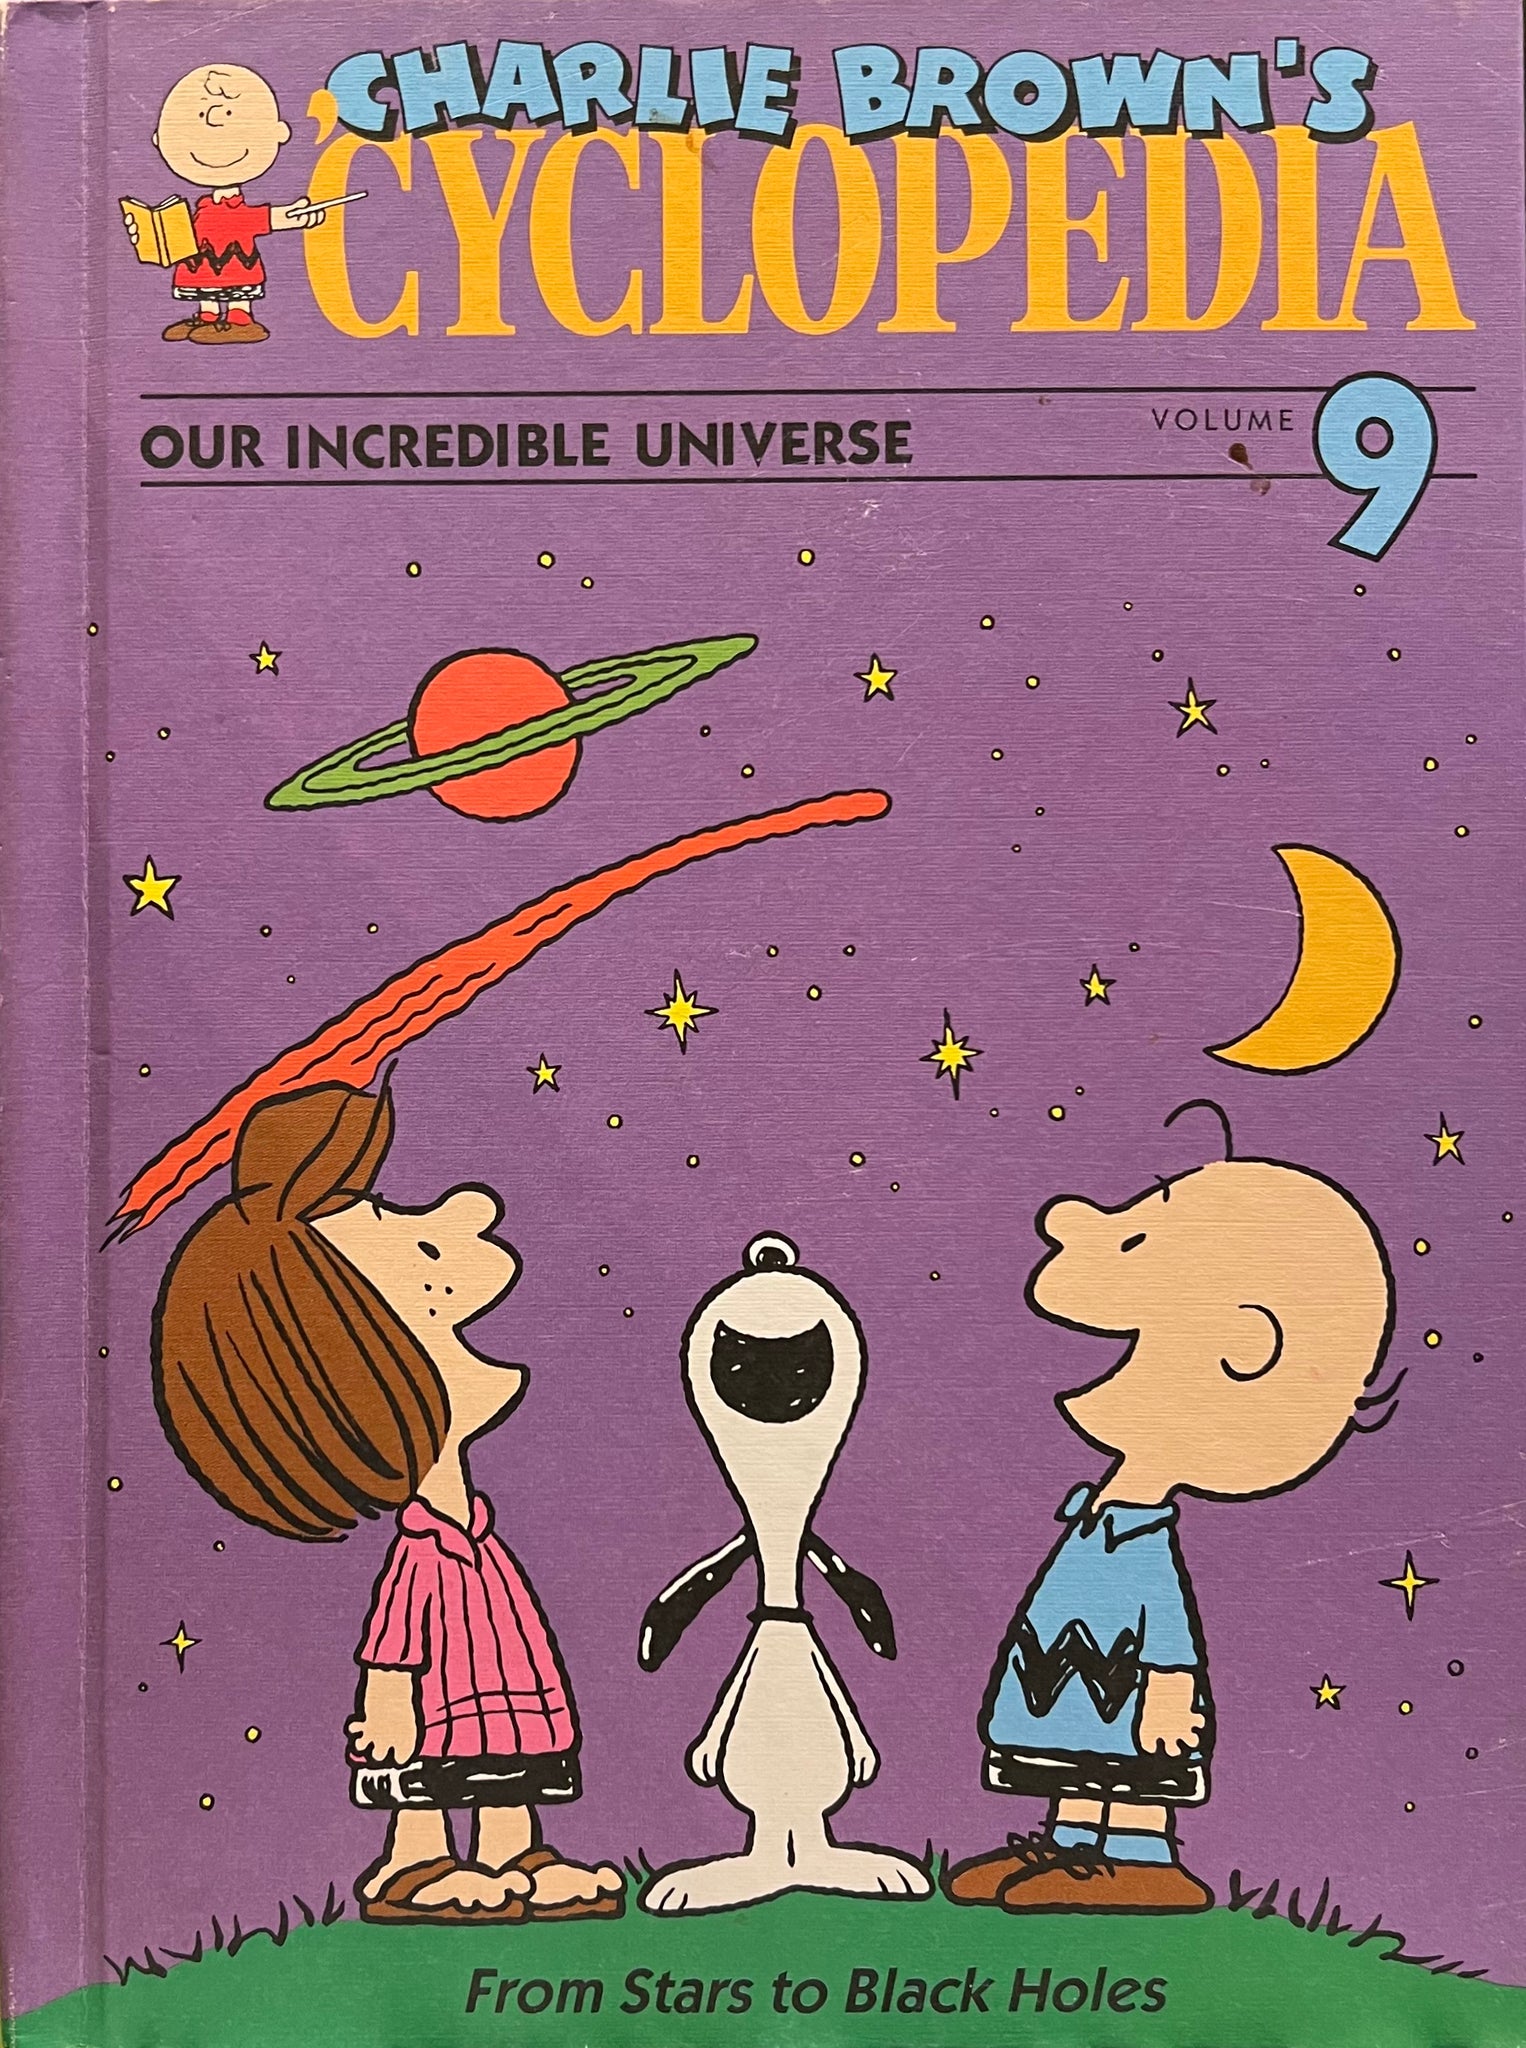 Charlie Brown’s ‘Cyclopedia: Our Incredible Universe - From Stars to Black Holes (Volume 9)